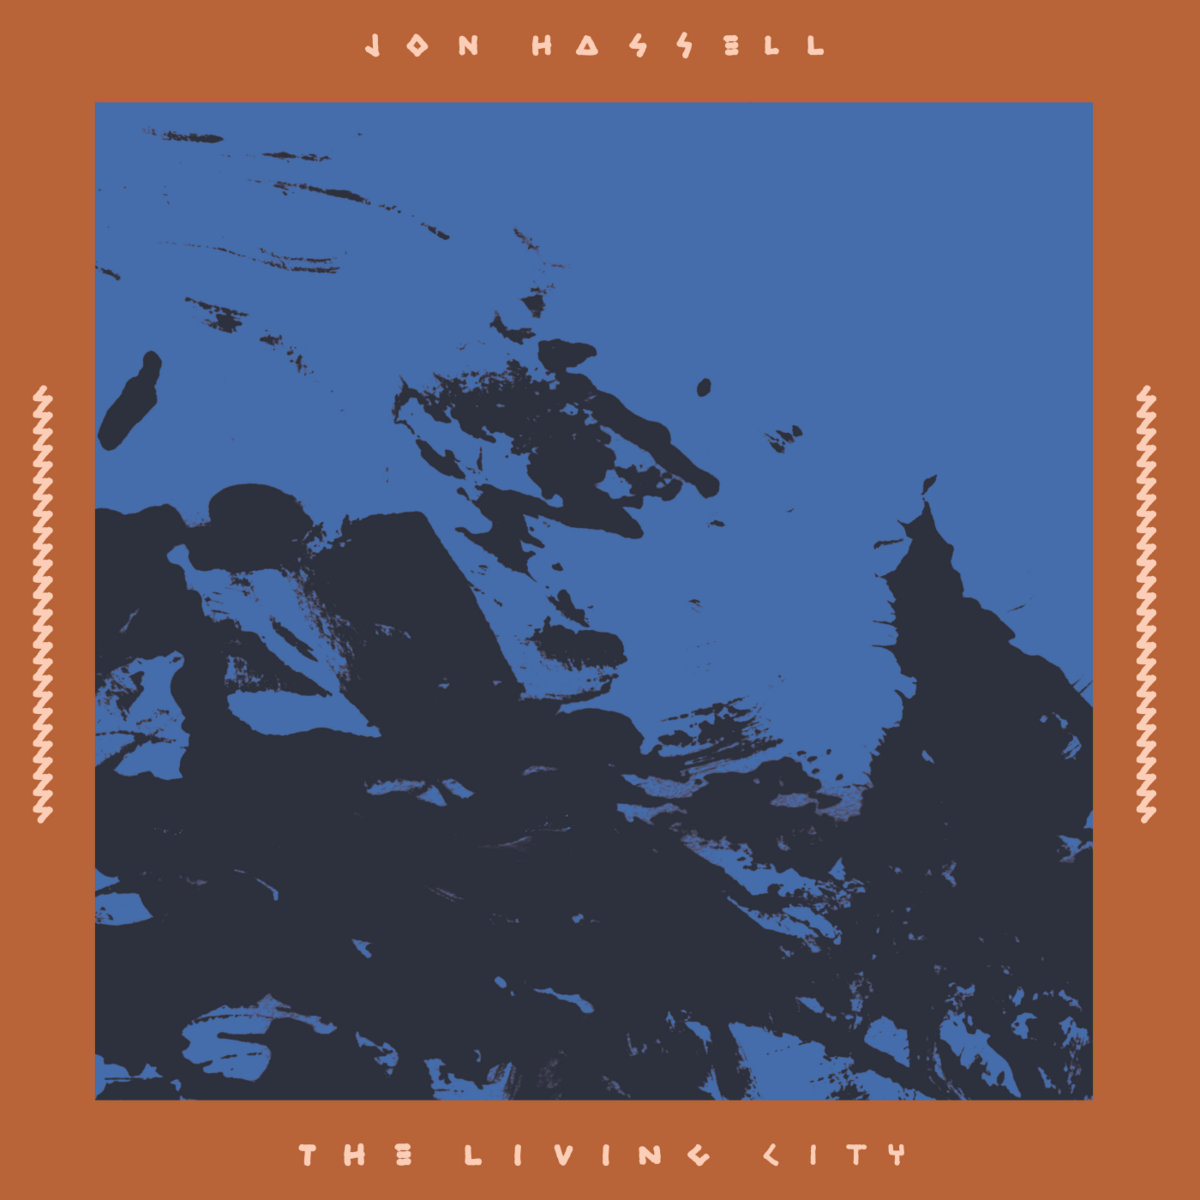 #NowPlaying • Jon Hassell - Psychogeography [Zones Of Feeling] (Feb 17 2023) jonhassell.bandcamp.com/album/psychoge… • Jon Hassell - The Living City [Live At The Winter Garden 17 September 1989] (Feb 17 2023) jonhassell.bandcamp.com/album/the-livi…